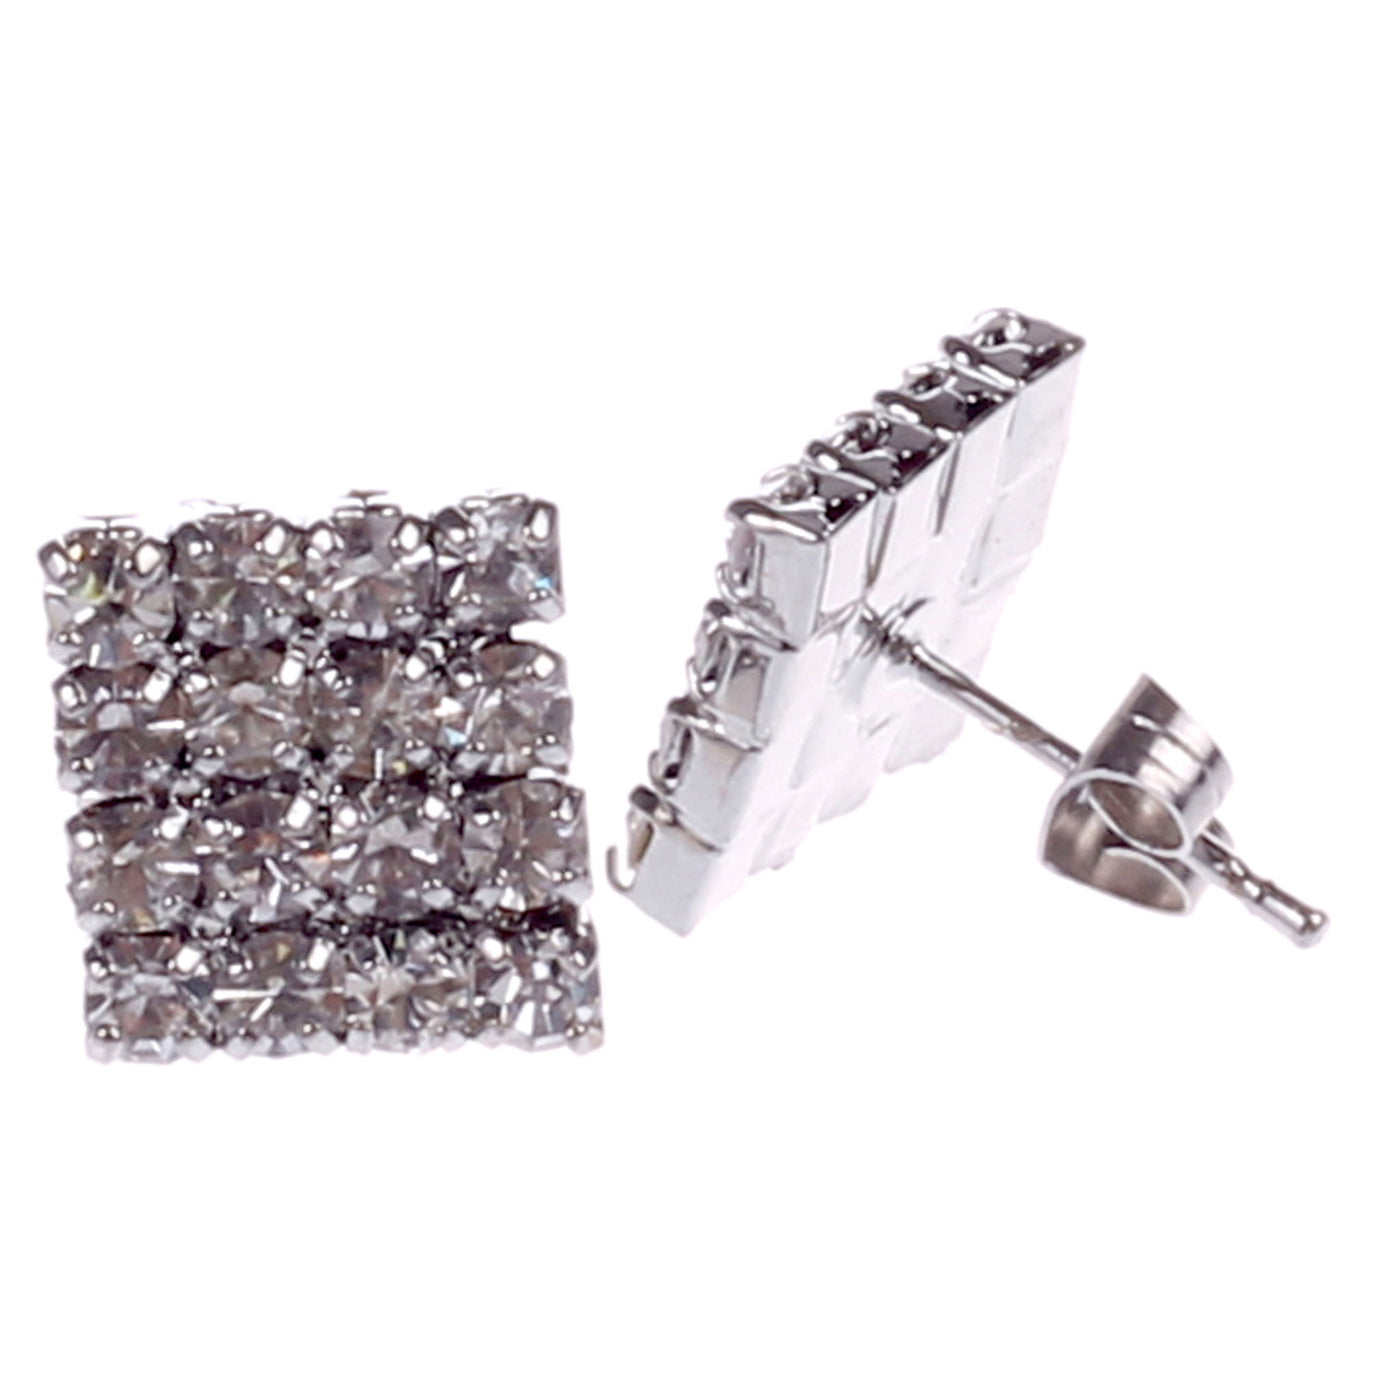 Square Straight earrings 4x4